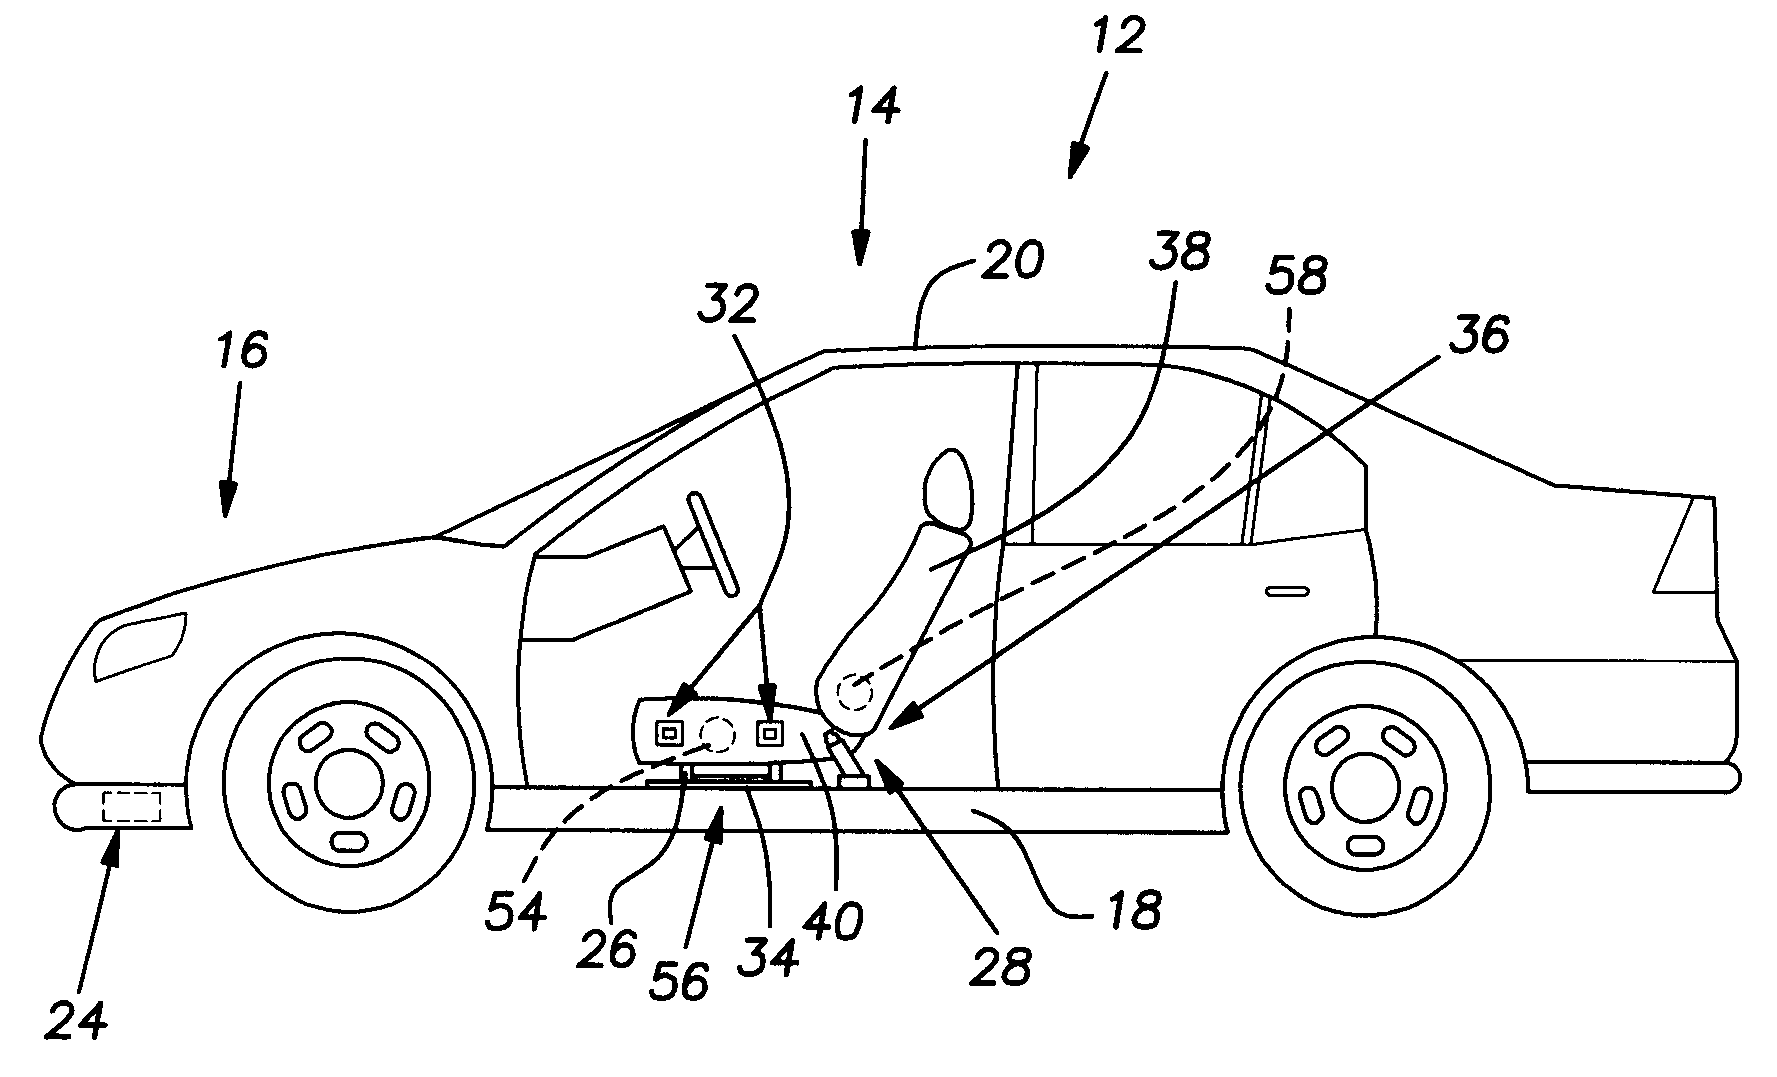 Fitness factor for automatically adjusting a vehicle HVAC system